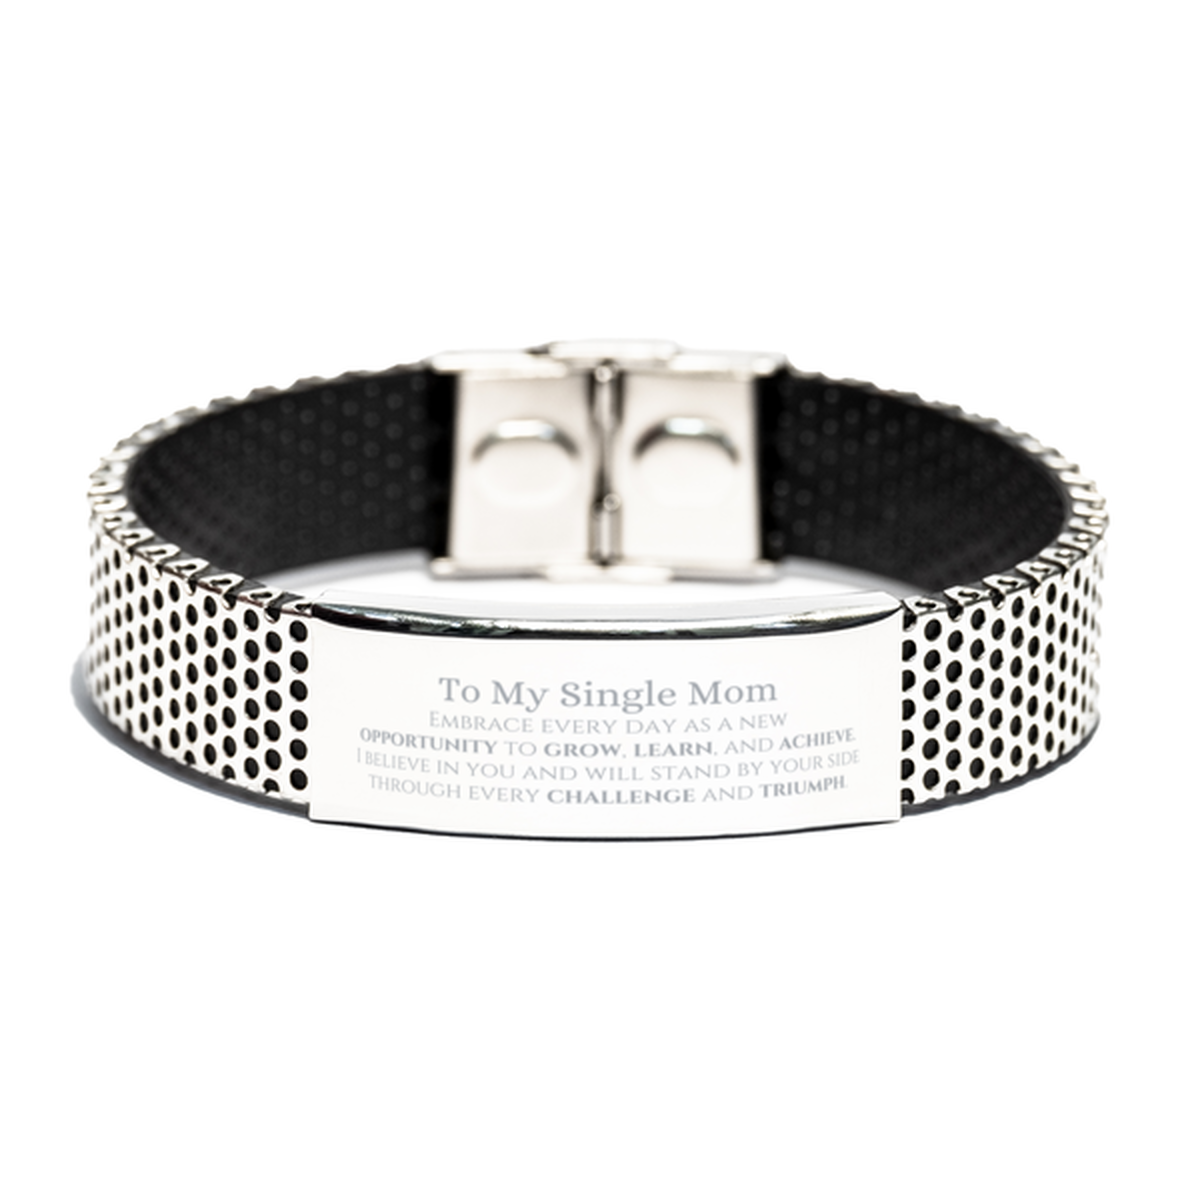 To My Single Mom Gifts, I believe in you and will stand by your side, Inspirational Stainless Steel Bracelet For Single Mom, Birthday Christmas Motivational Single Mom Gifts